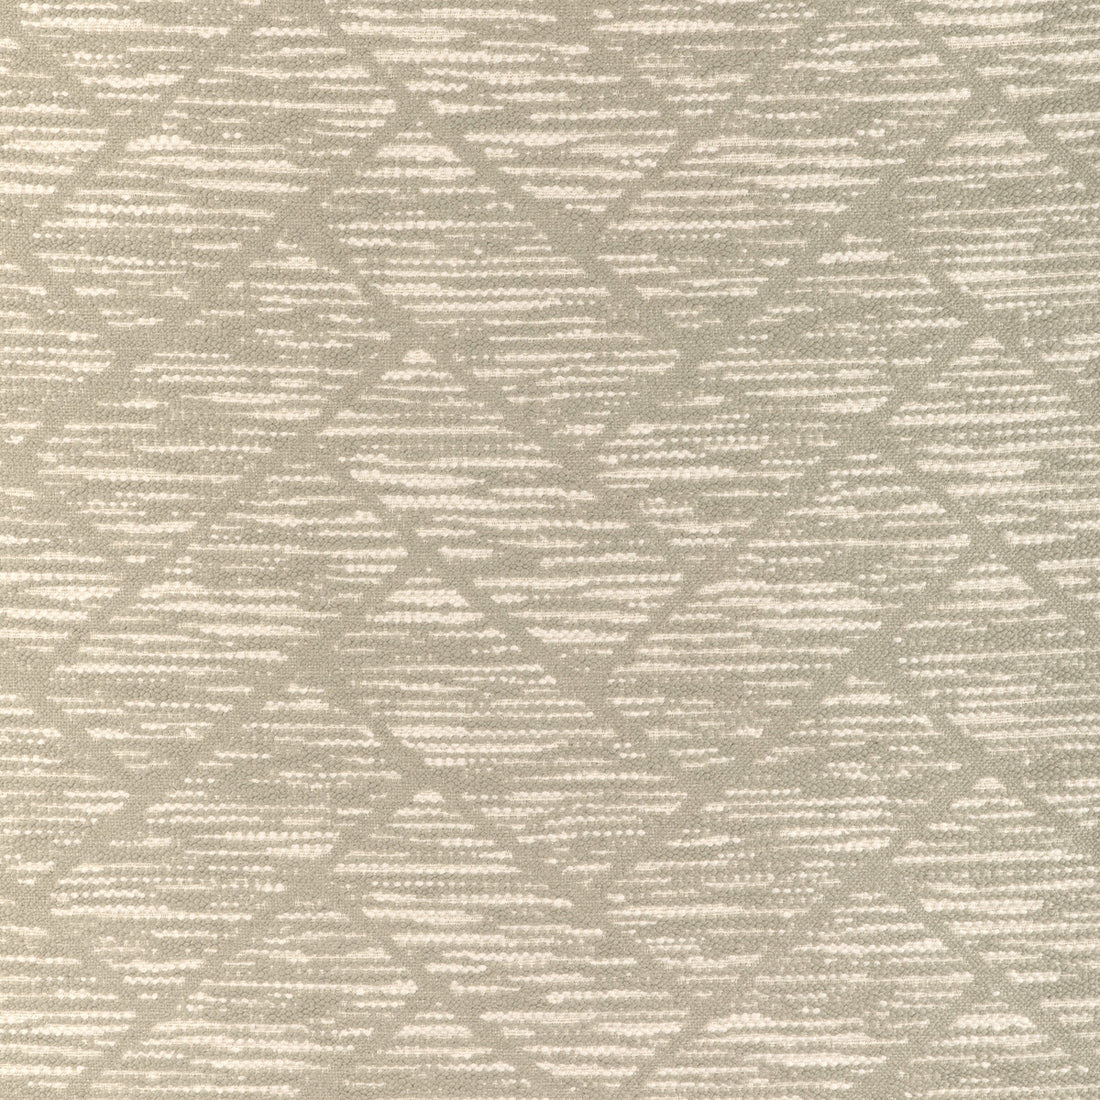 Kudo fabric in linen color - pattern 36890.16.0 - by Kravet Couture in the Atelier Weaves collection